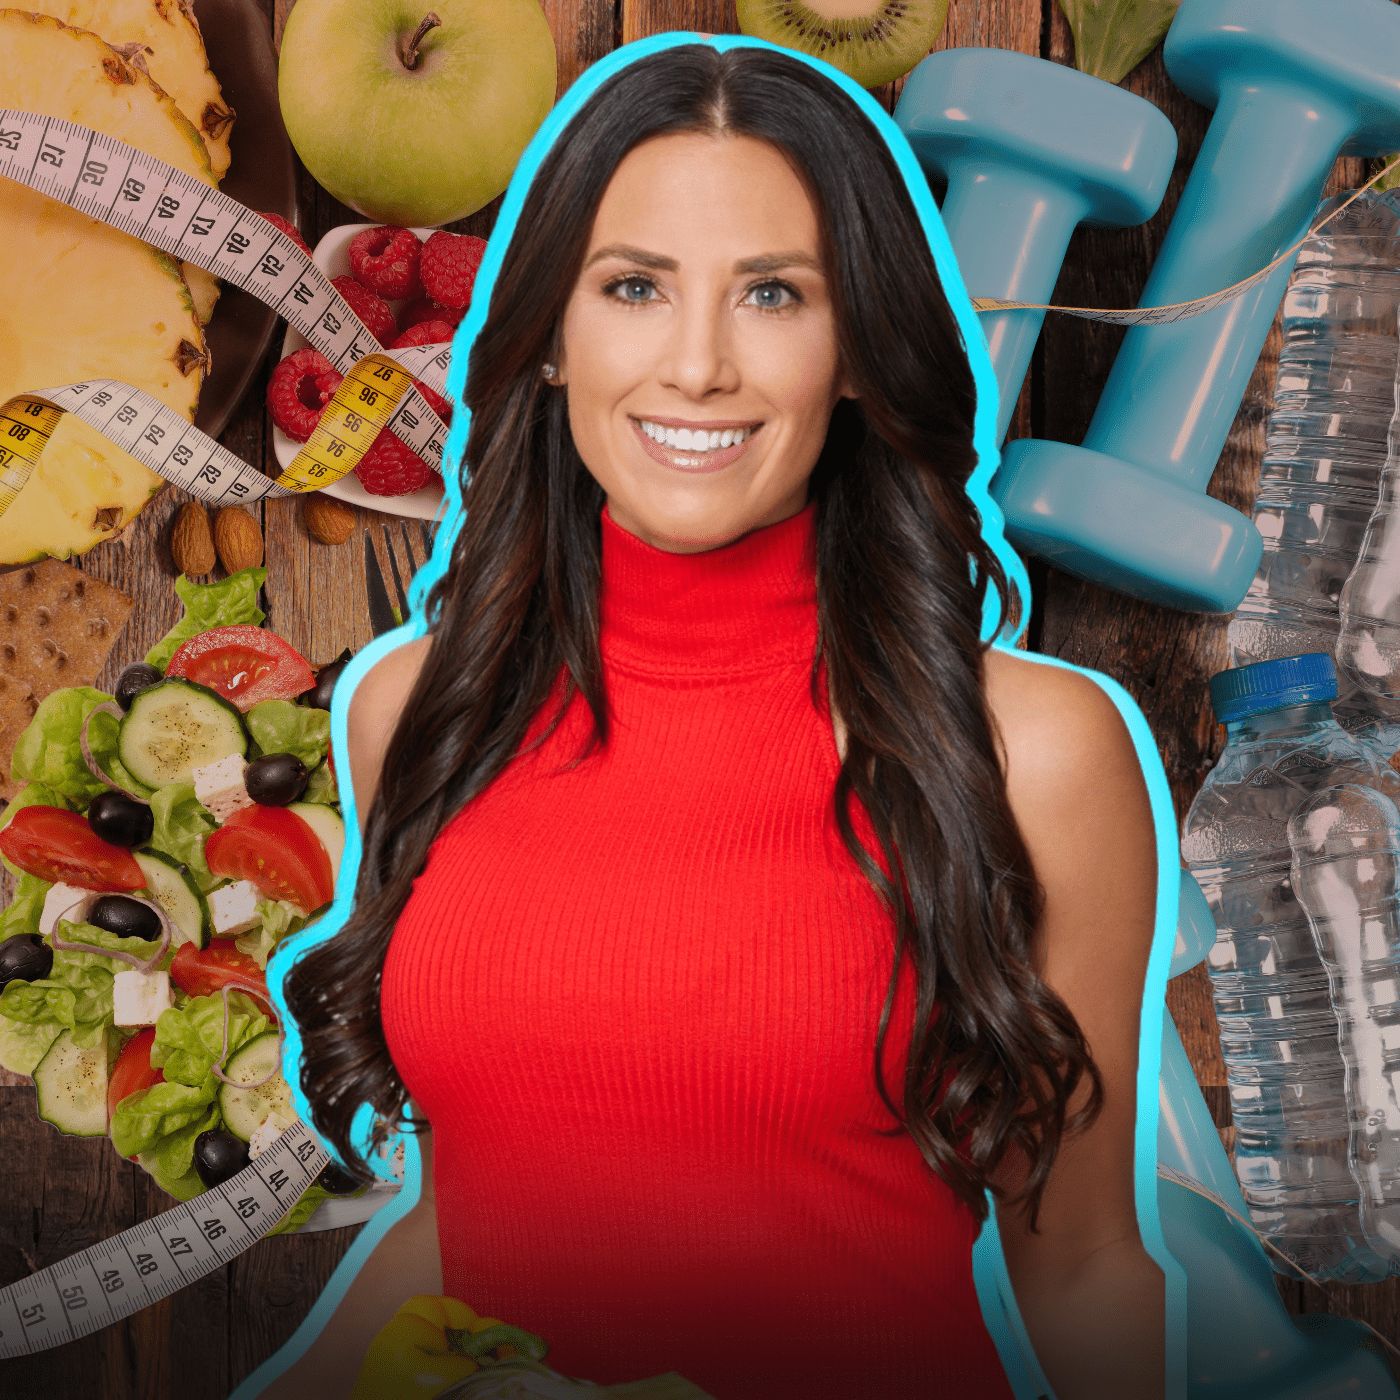 Preview image for Eat Better and Workout Smarter | Pro Tips from Super Trainer Autumn Calabrese